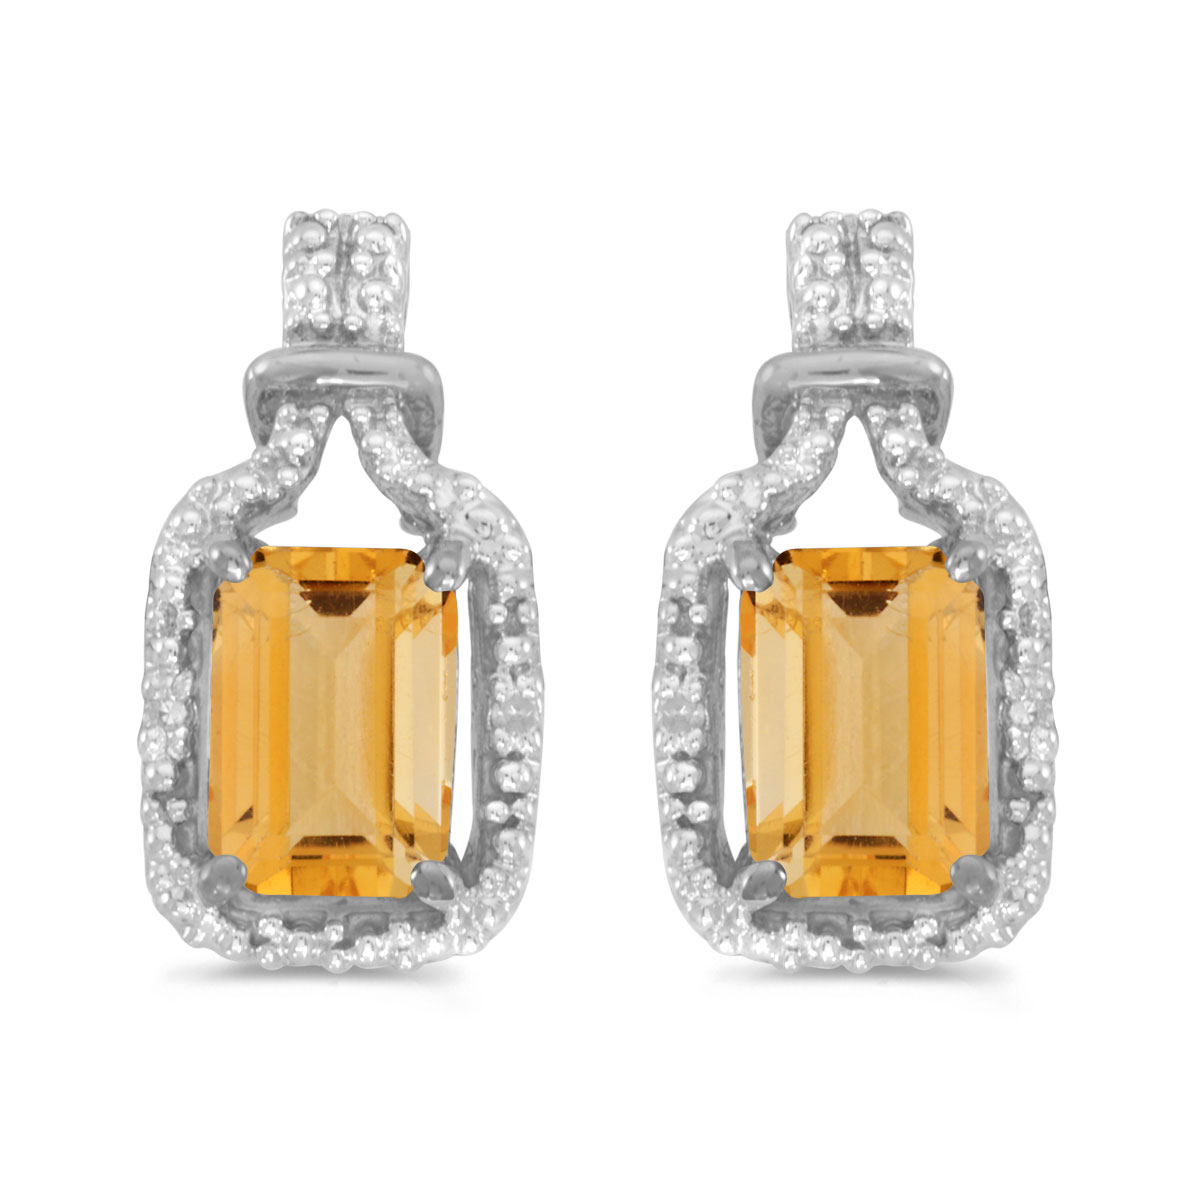 JCX2046: These 14k white gold emerald-cut citrine and diamond earrings feature 7x5 mm genuine natural citrines with a 1.58 ct total weight and sparkling diamond accents.